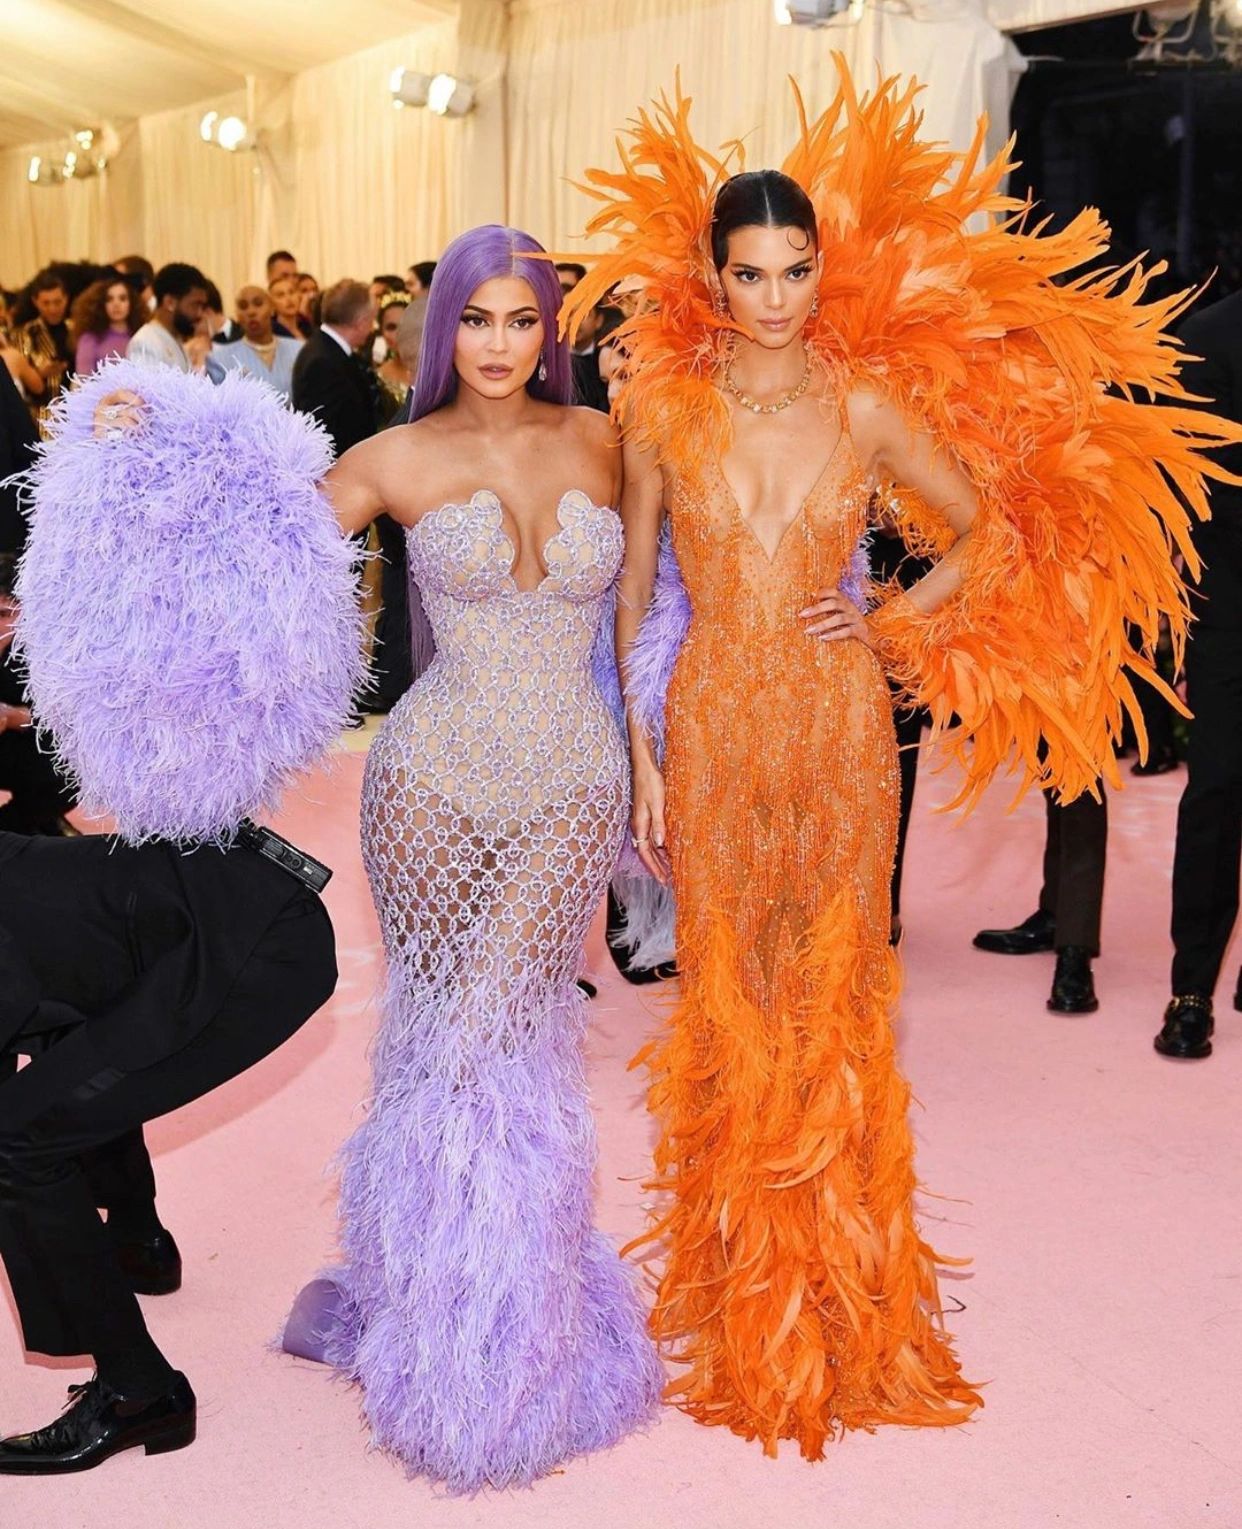 Met Gala, 2019: Kylie Jenner & Kendall Jenner. (Getty Images)